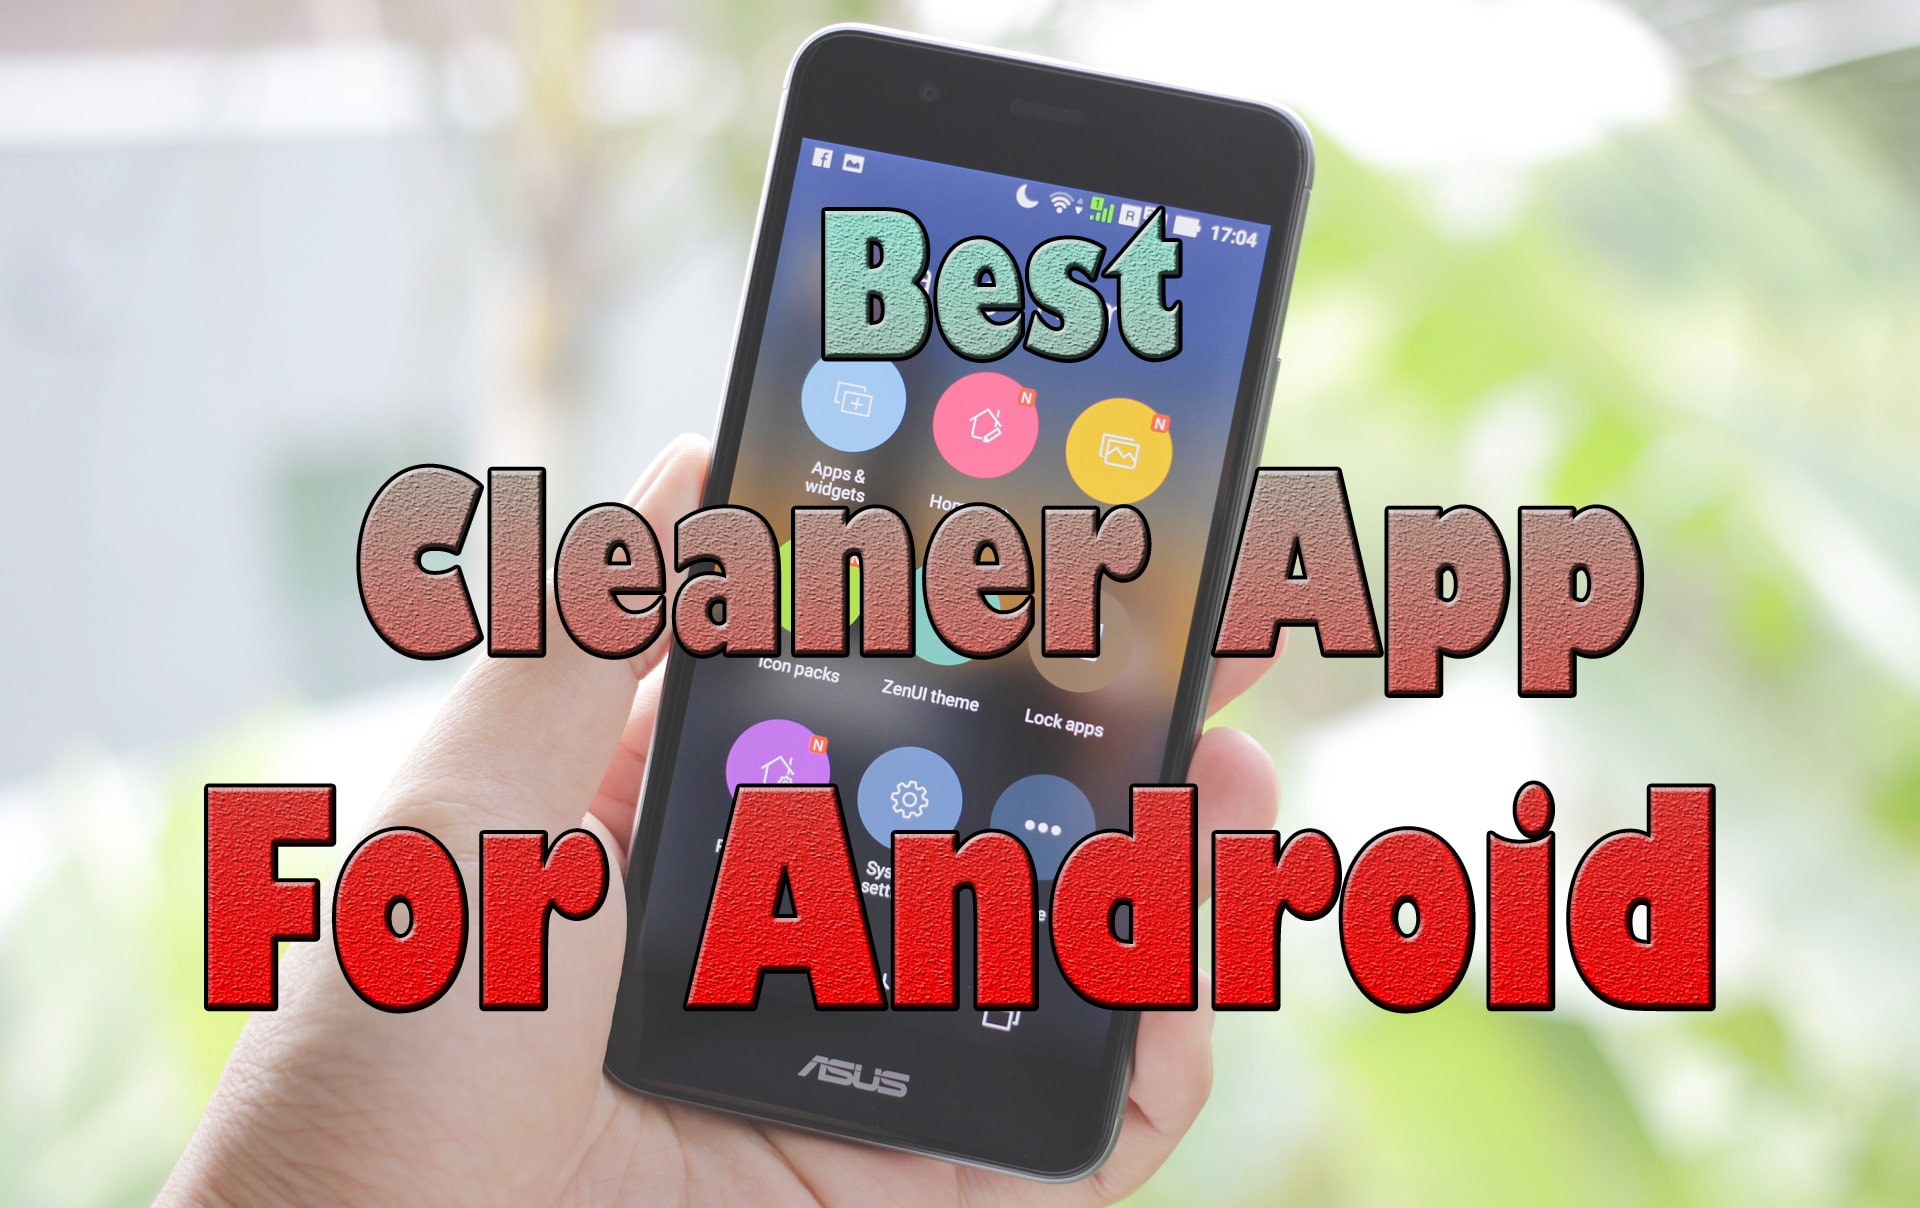 Best Cleaner App For Android